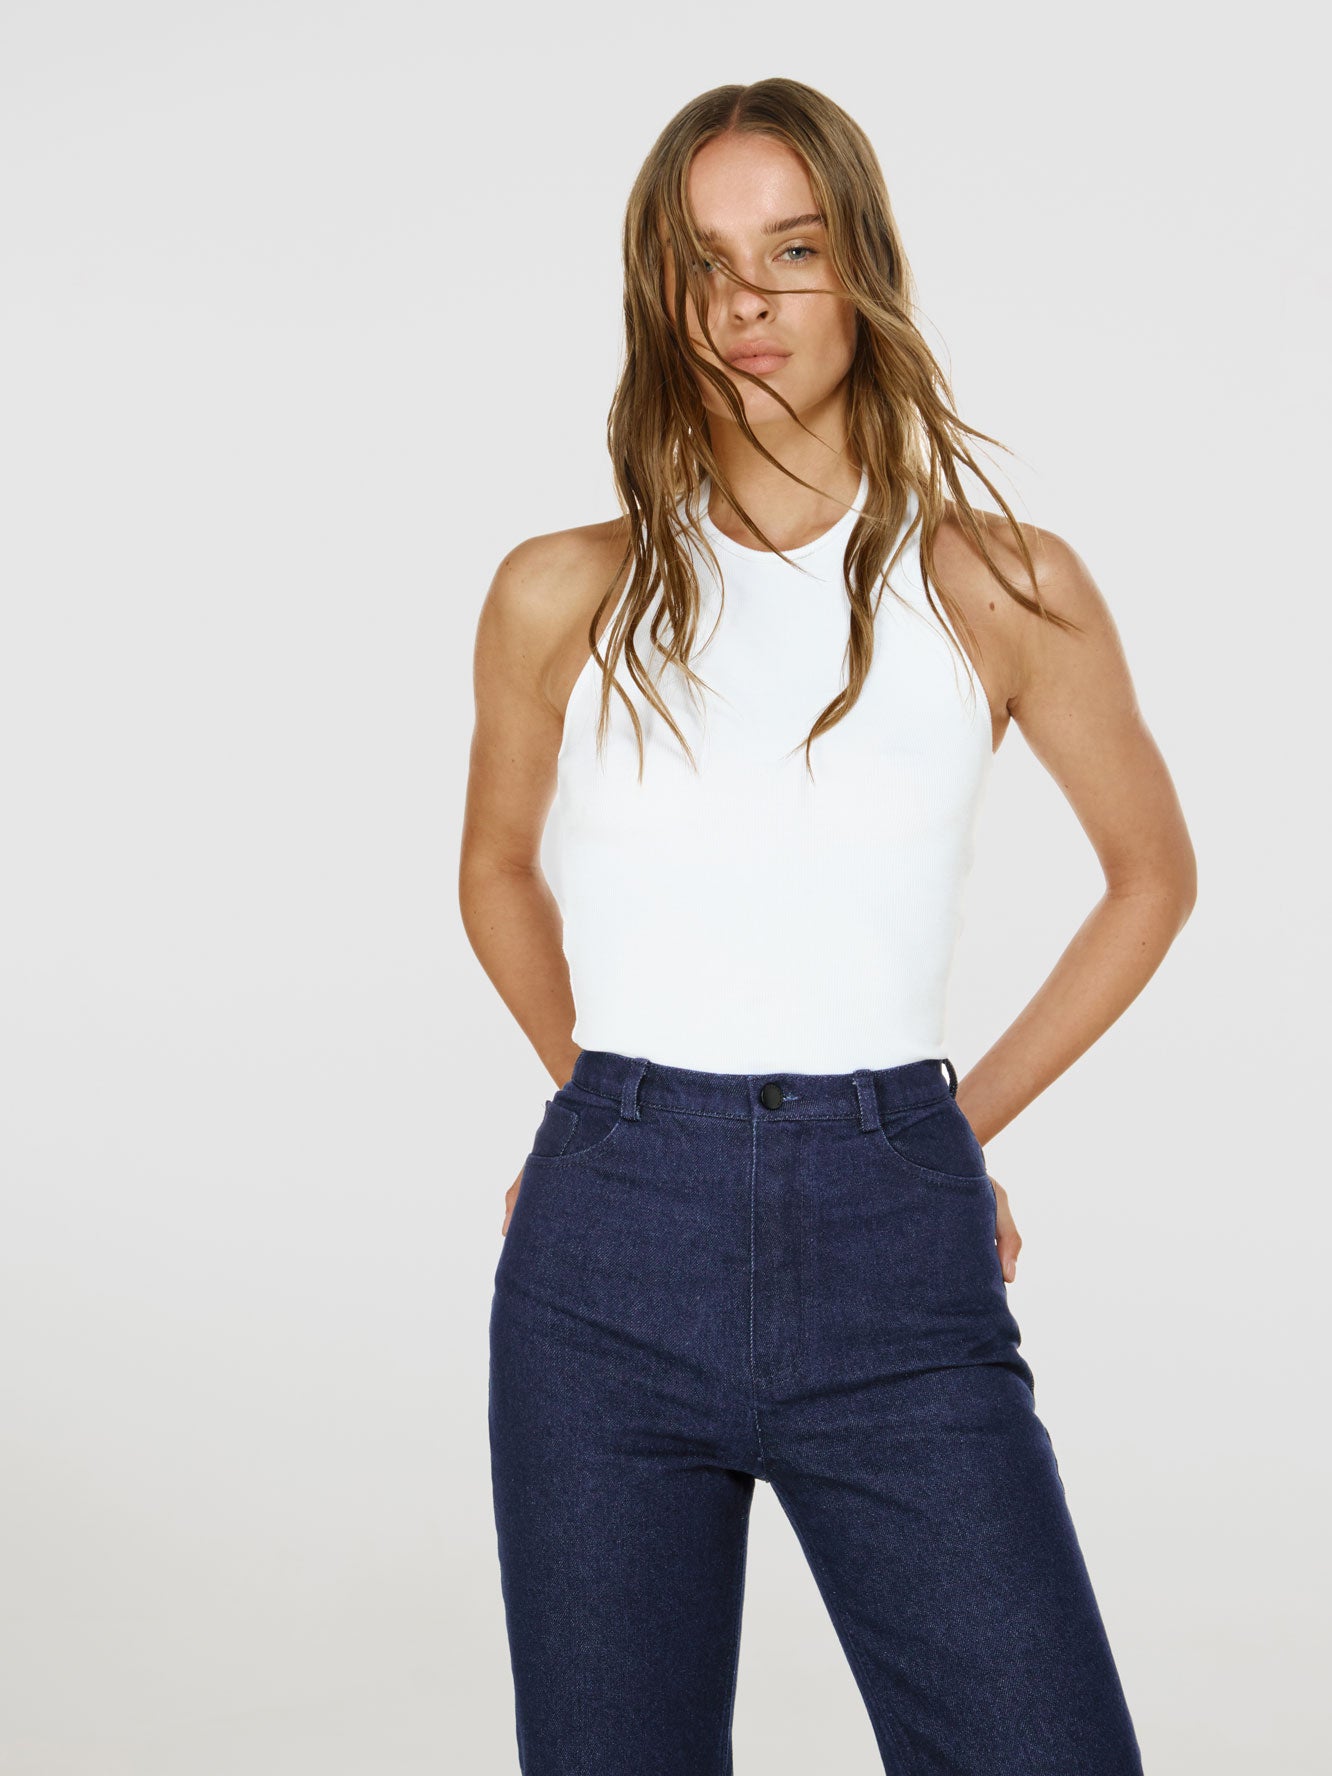 Cowboy shot of a girl in white viscose tank top and blue denim jeans